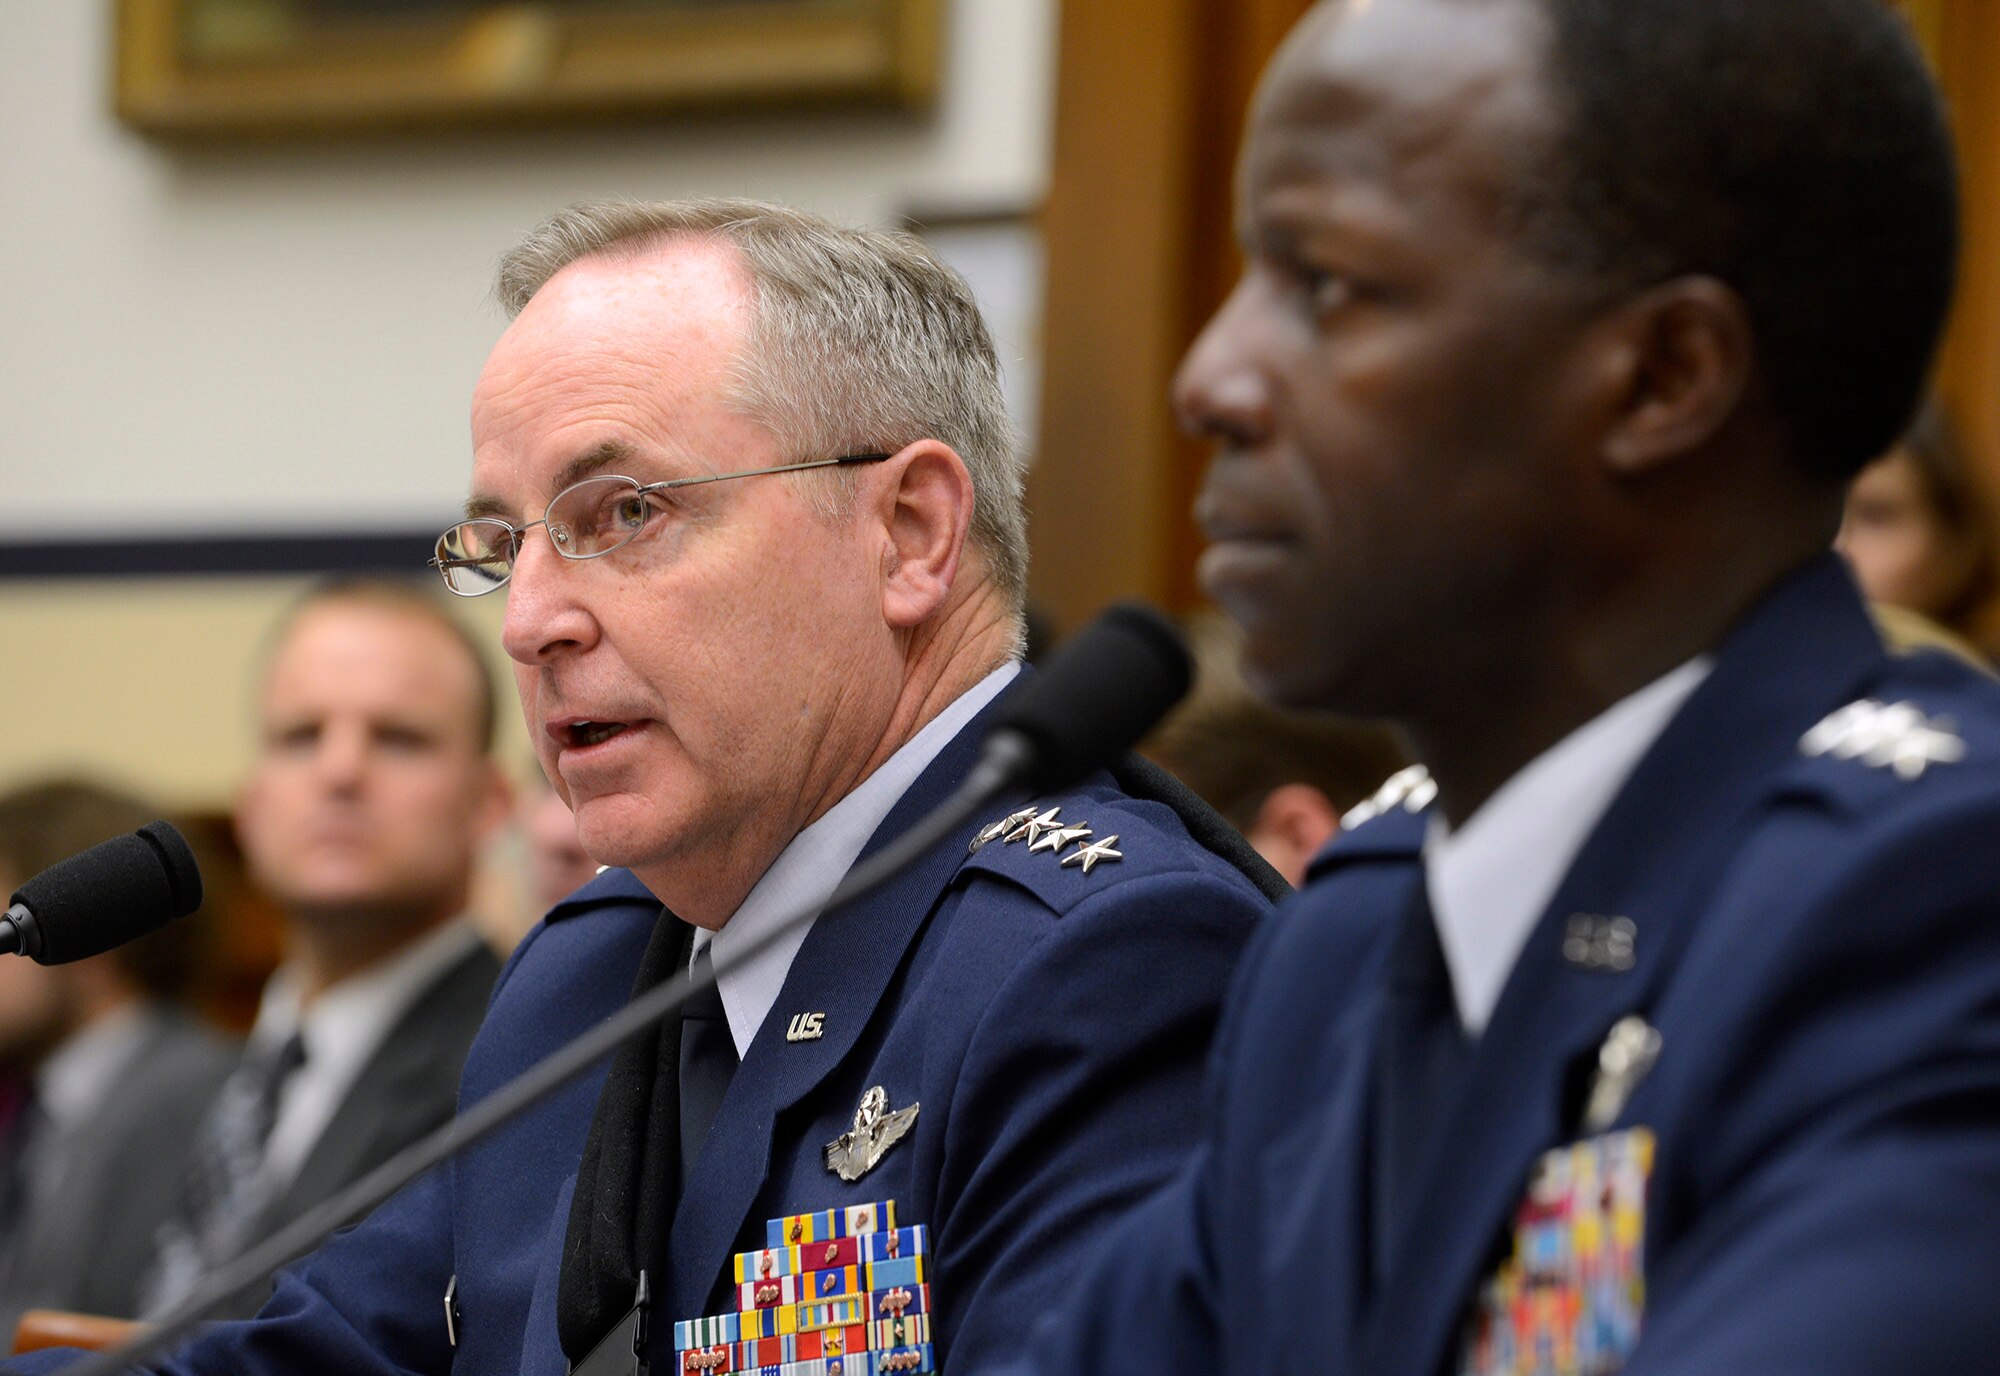 Air Force Chief of Staff Gen. Mark A. Welsh III and Gen. Edward A. Rice Jr., commander of Air Education and Training Command, appear before the House Armed Services Committee on Jan. 23, 2013, for a hearing on sexual misconduct at Basic Military Training at Joint Base San Antonio-Lackland, Texas.  Welsh and Rice discussed the findings of the Basic Military Training commander-directed investigation and efforts to stop sexual assault within the service.  (U.S. Air Force photo/Scott M. Ash)